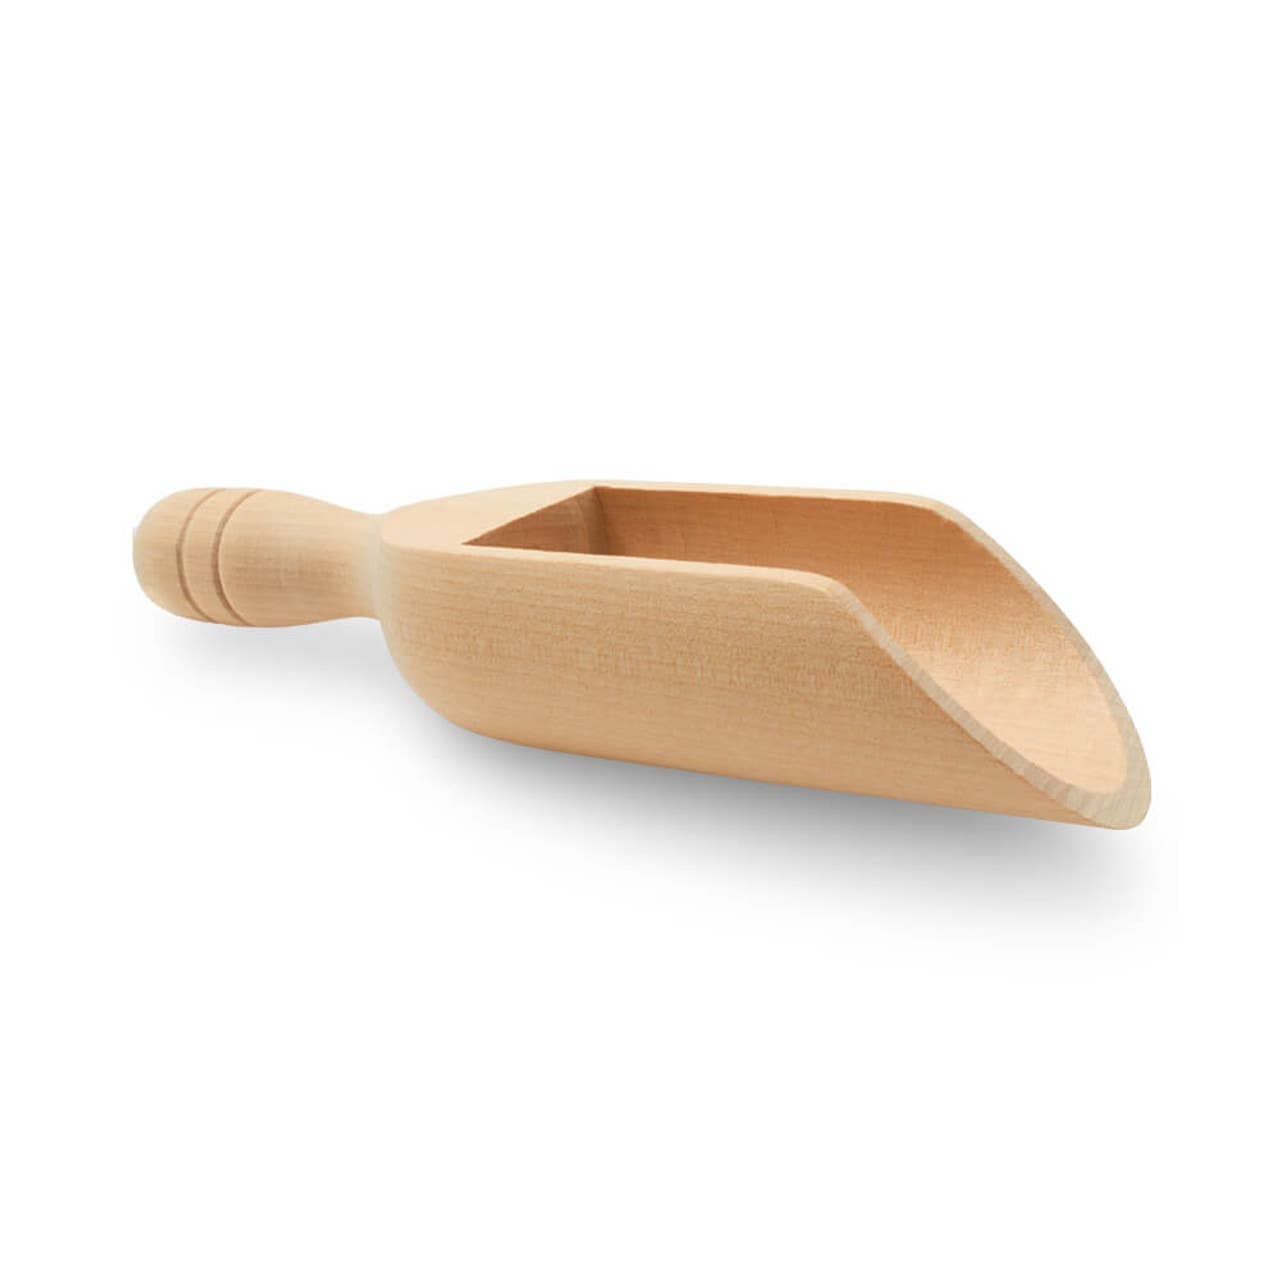 Large Wooden Scooper for Kids Sensory Bins - 8 inches